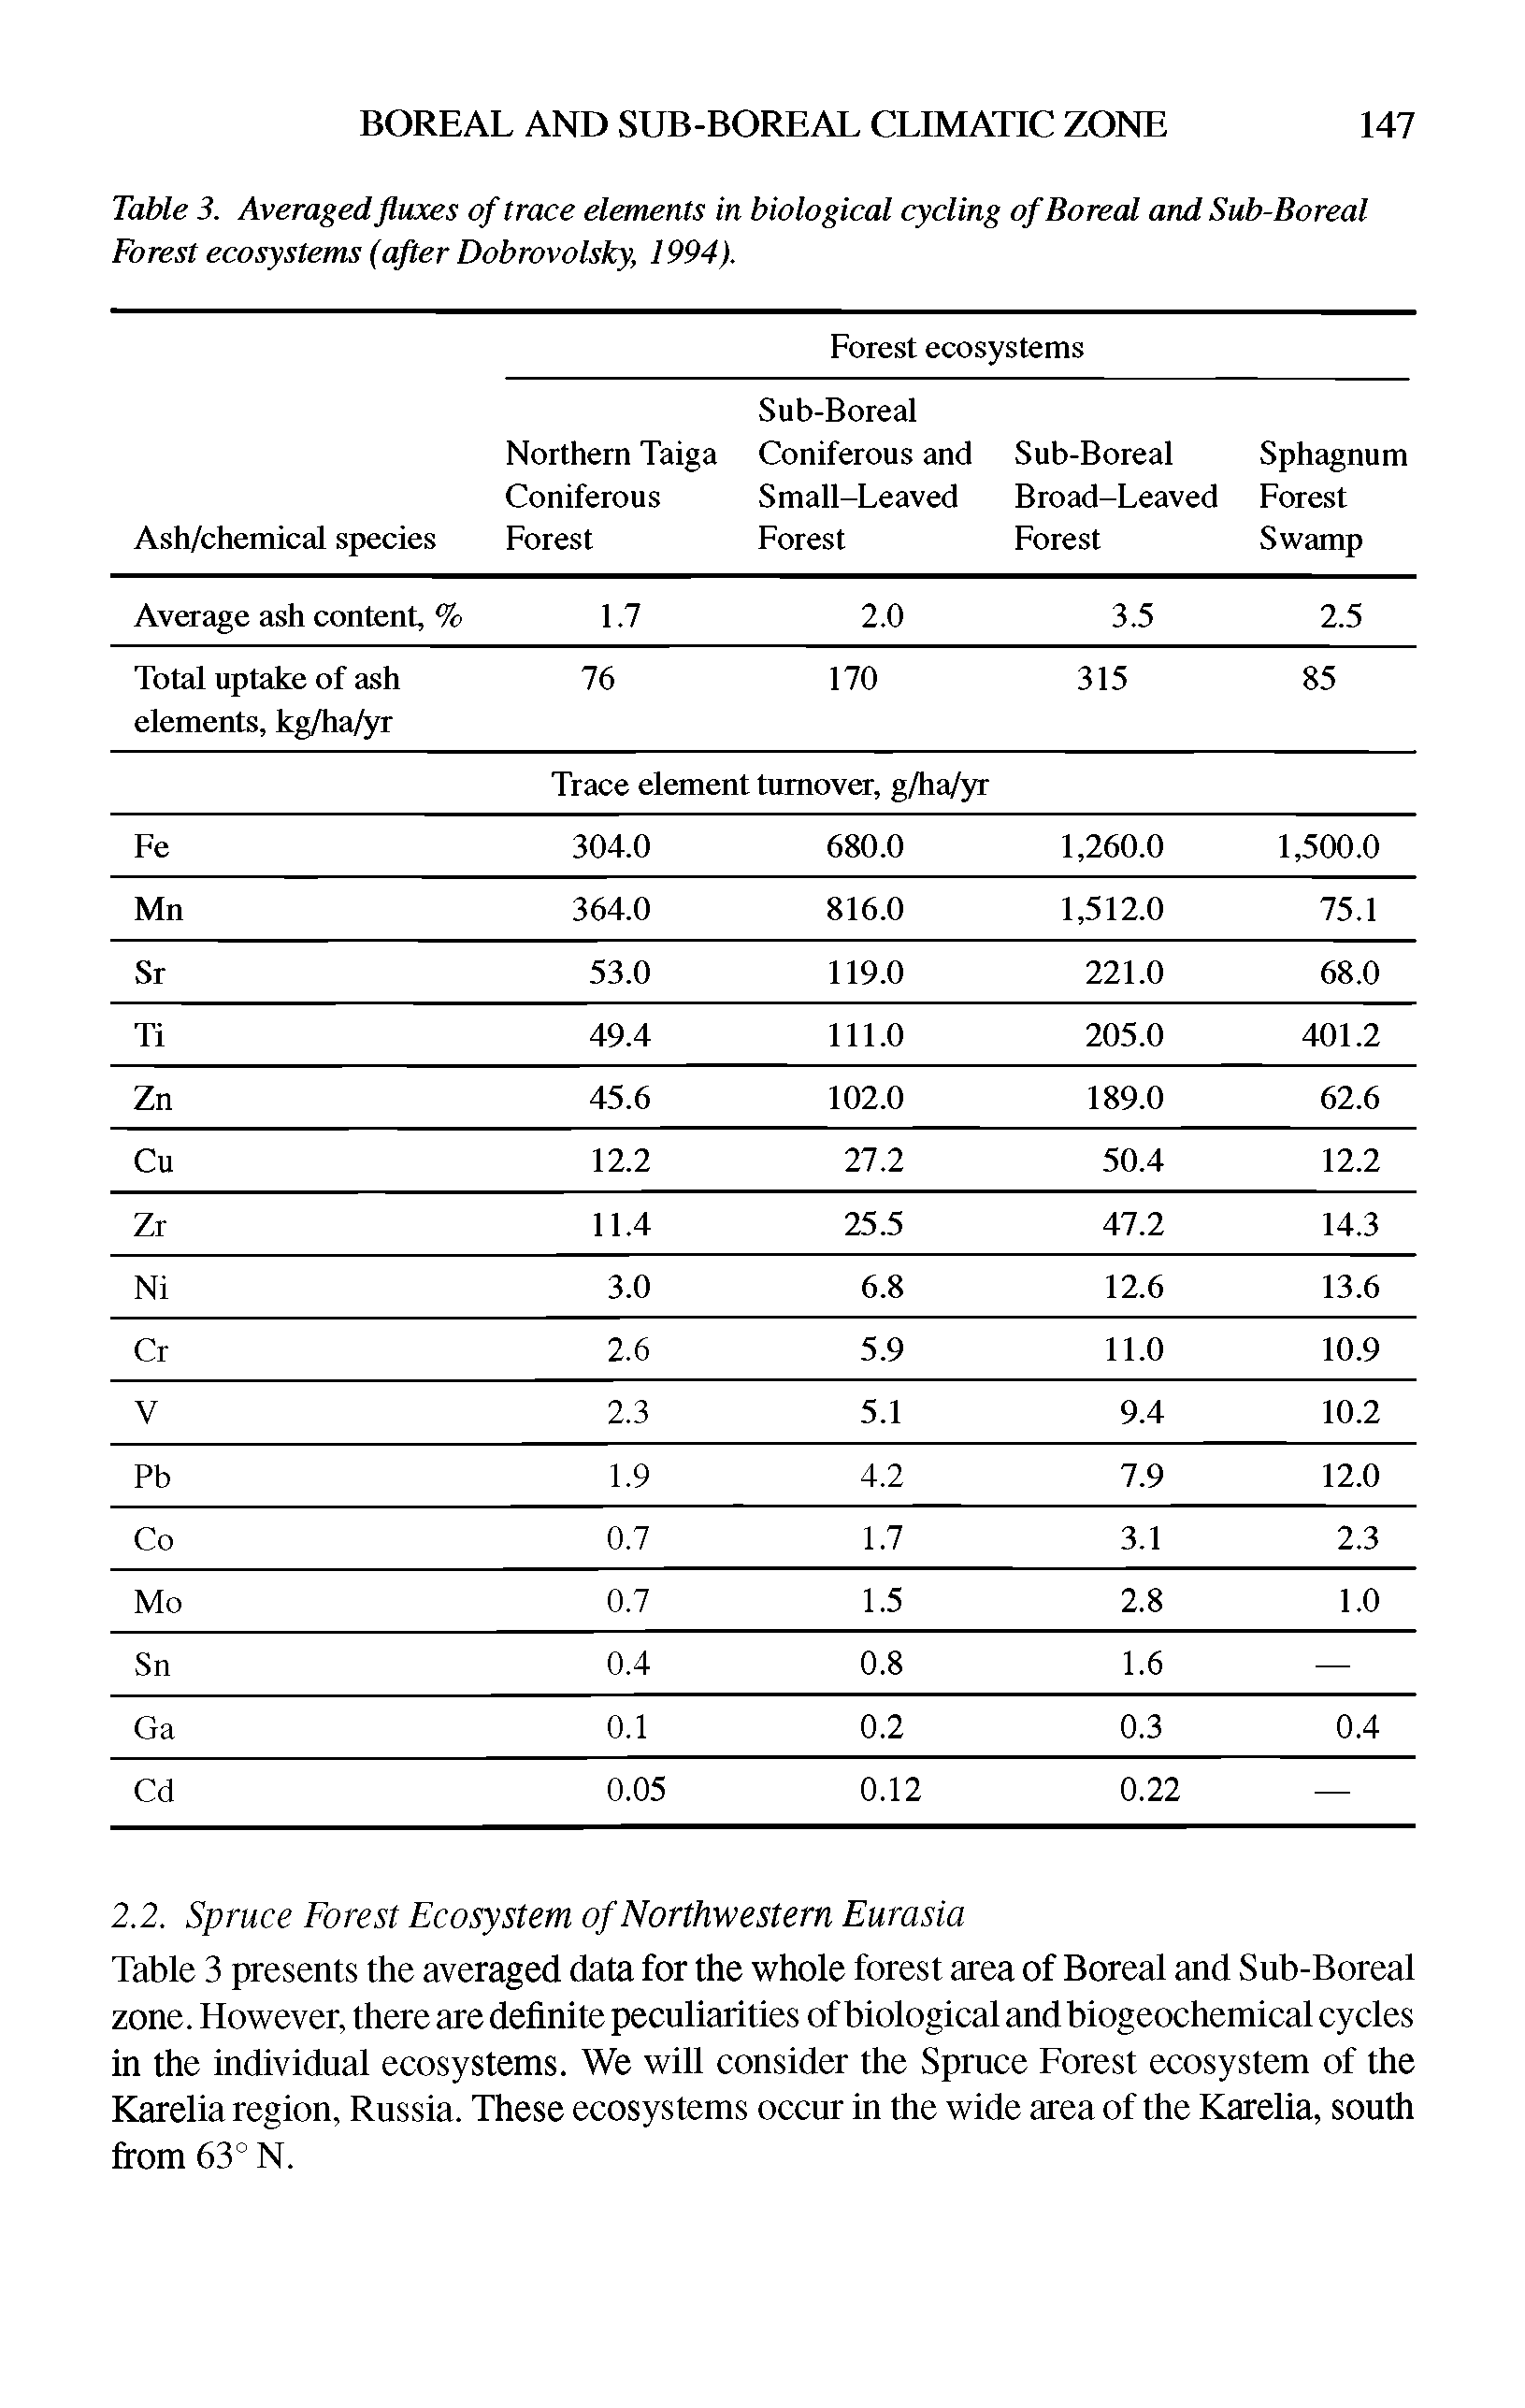 Table 3. Averaged fluxes of trace elements in biological cycling of Boreal and Sub-Boreal Forest ecosystems (after Dobrovolsky, 1994).